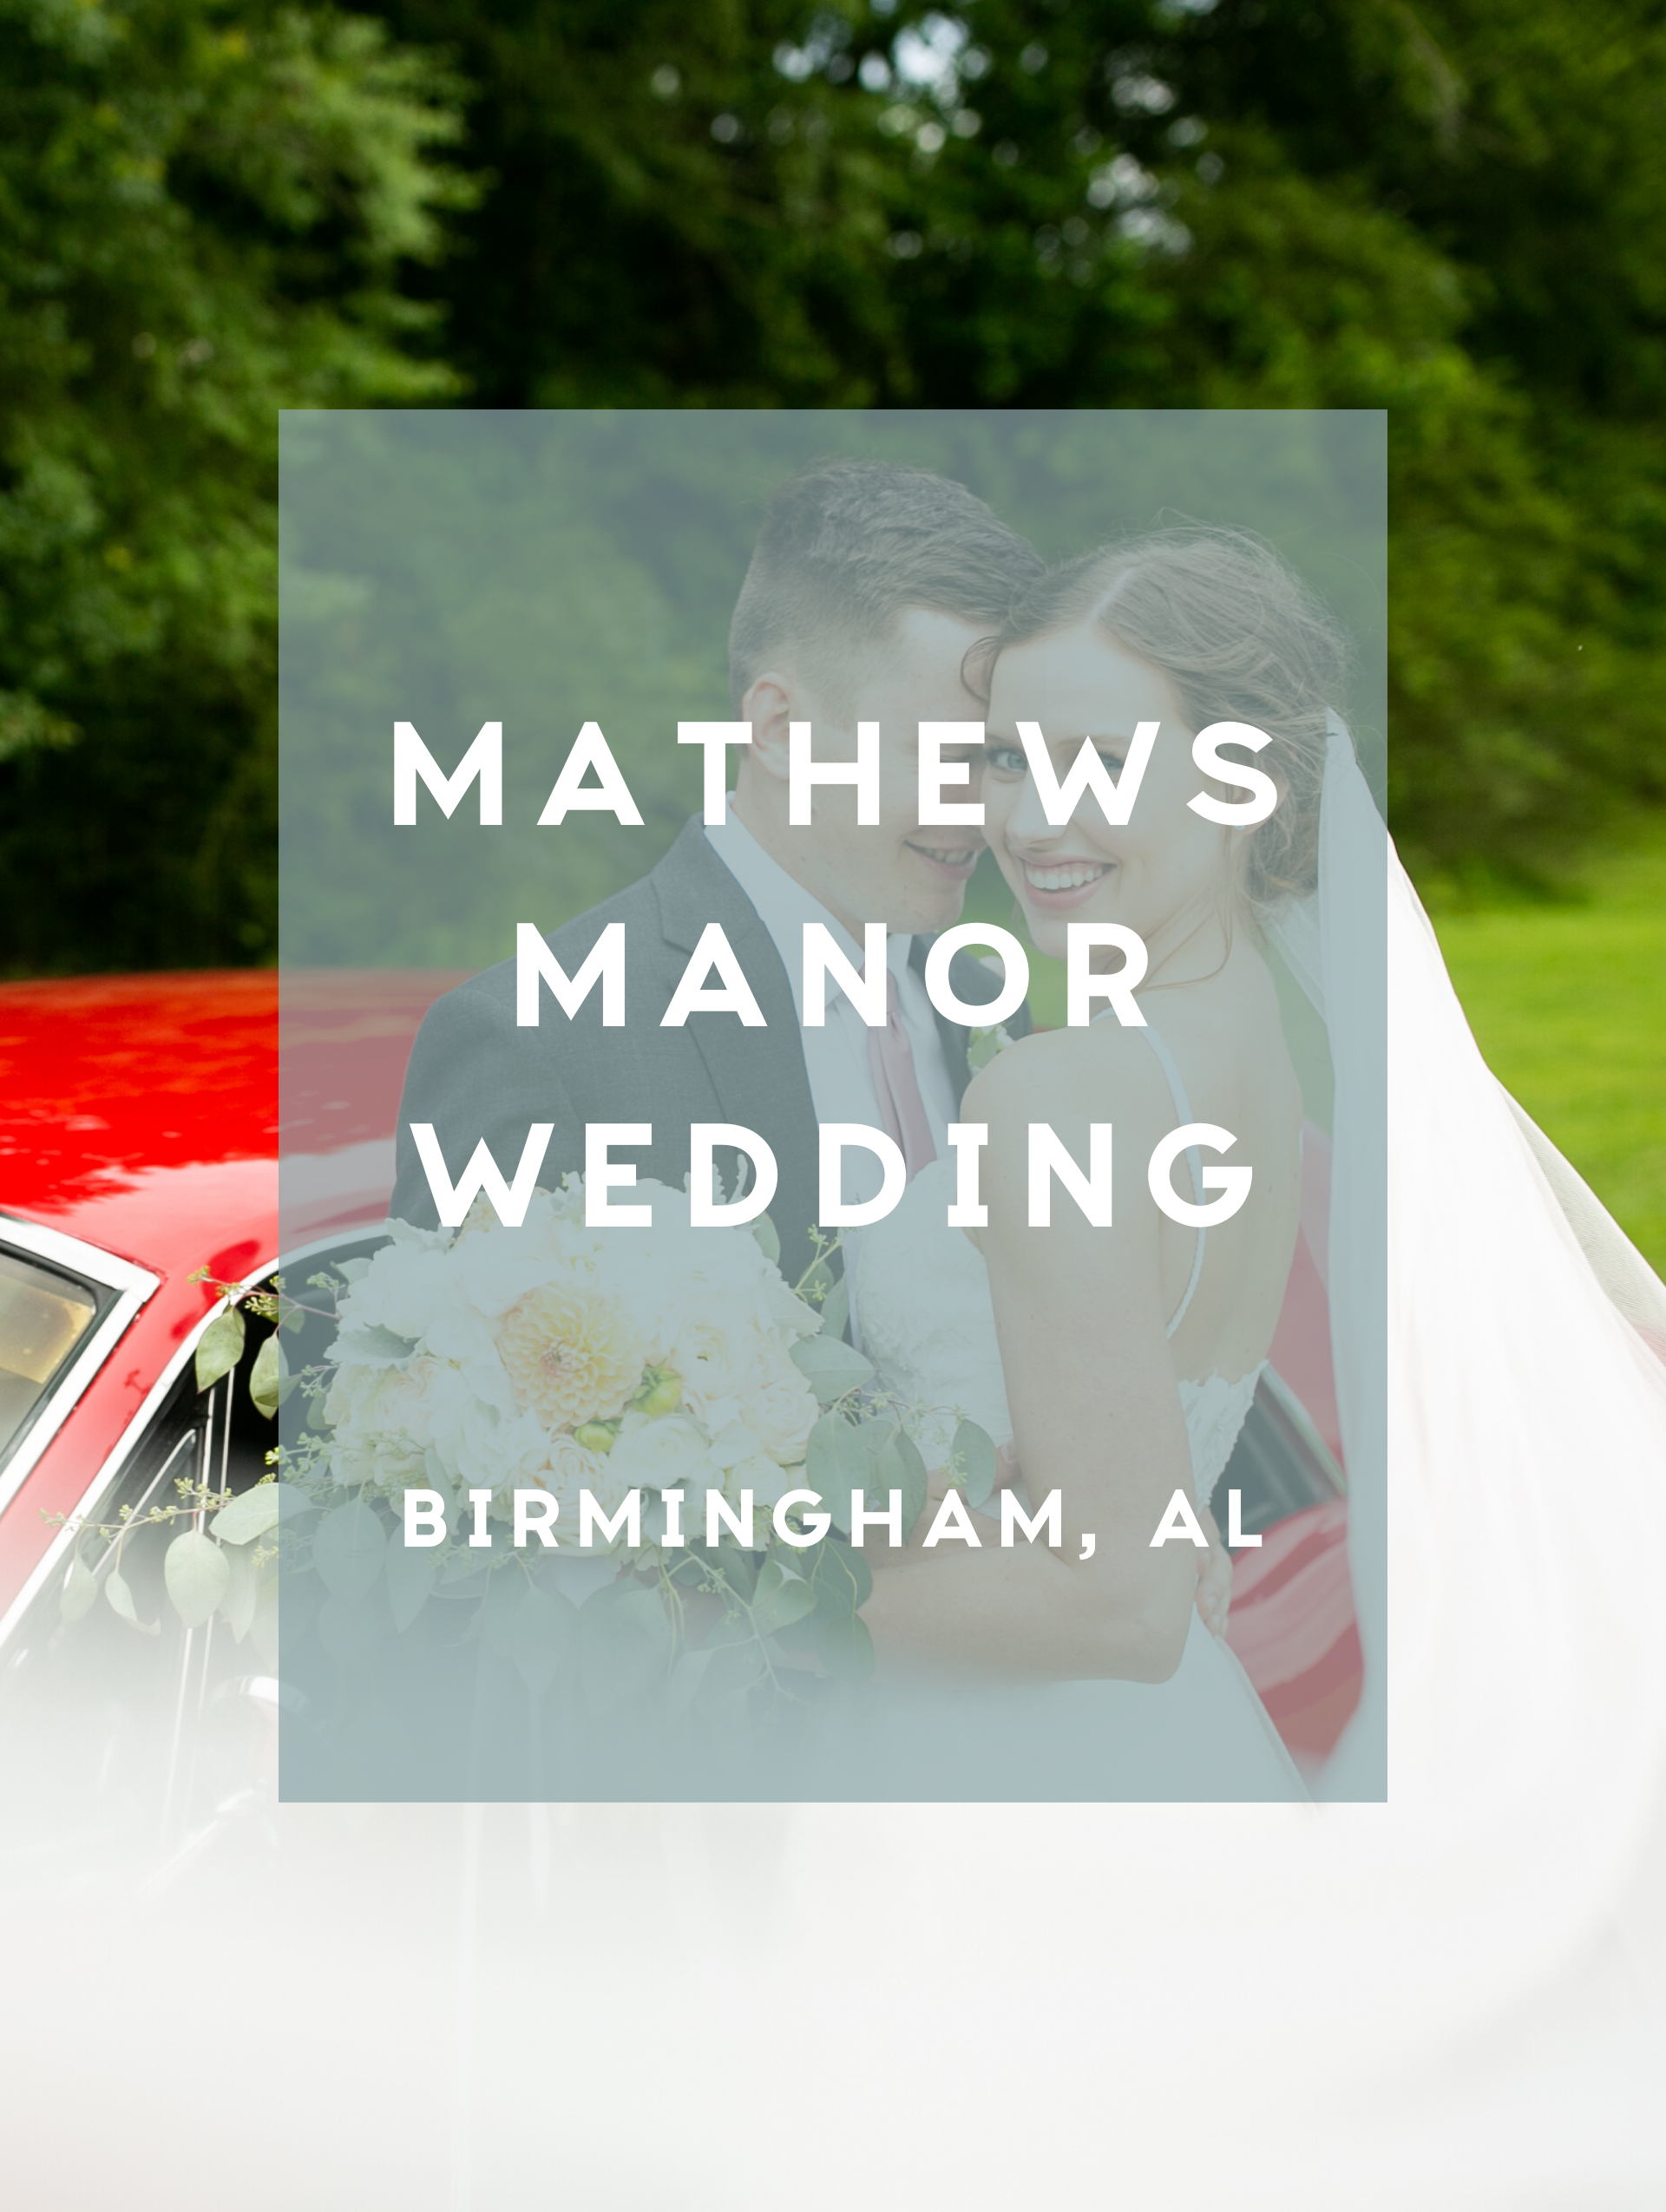 A meaningful spring wedding day with ceremony and reception at Highlands Chapel and Mathews Manor in Birmingham, Alabama.